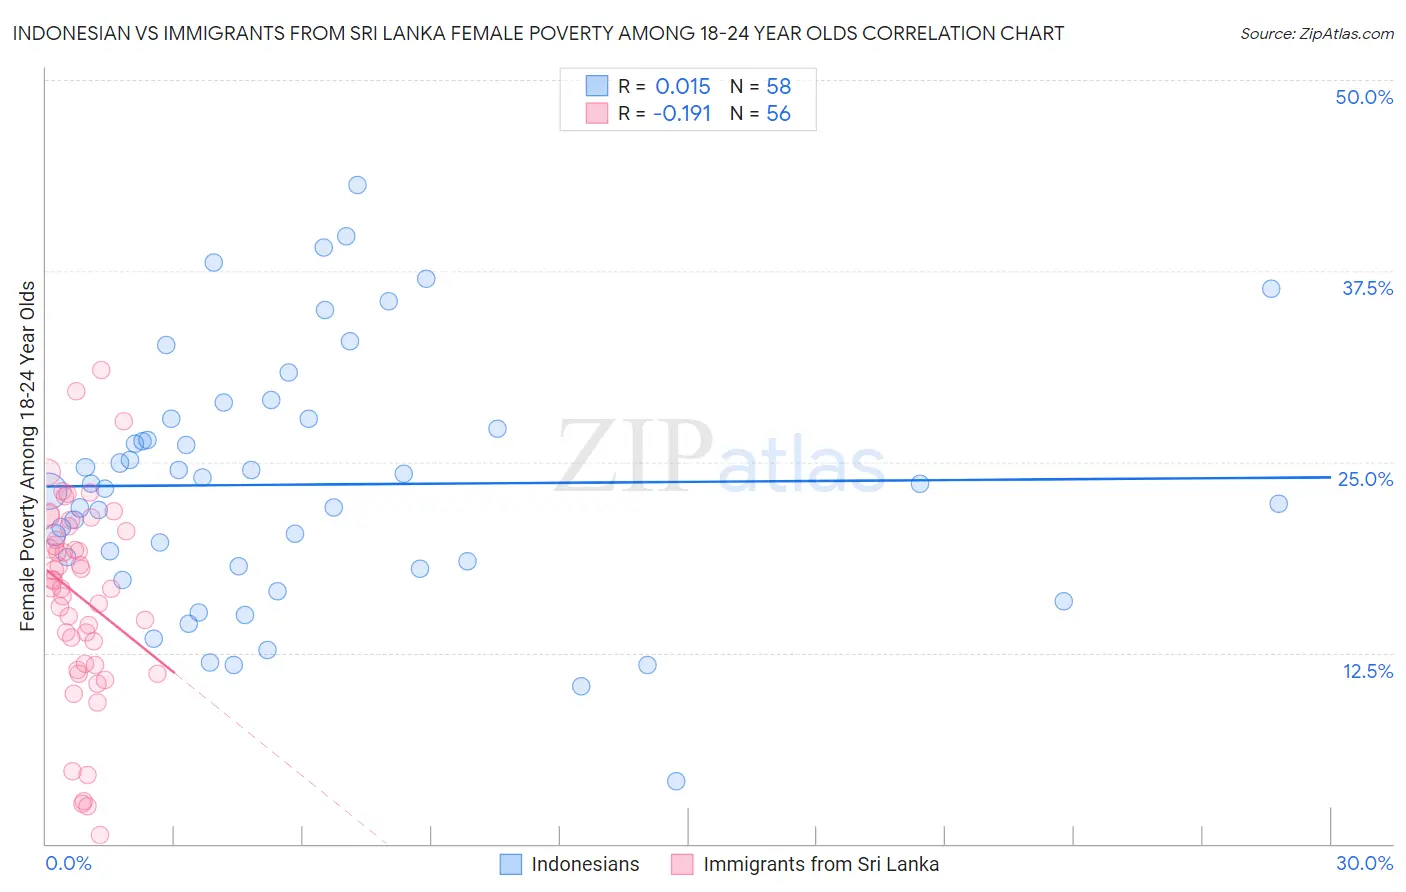 Indonesian vs Immigrants from Sri Lanka Female Poverty Among 18-24 Year Olds